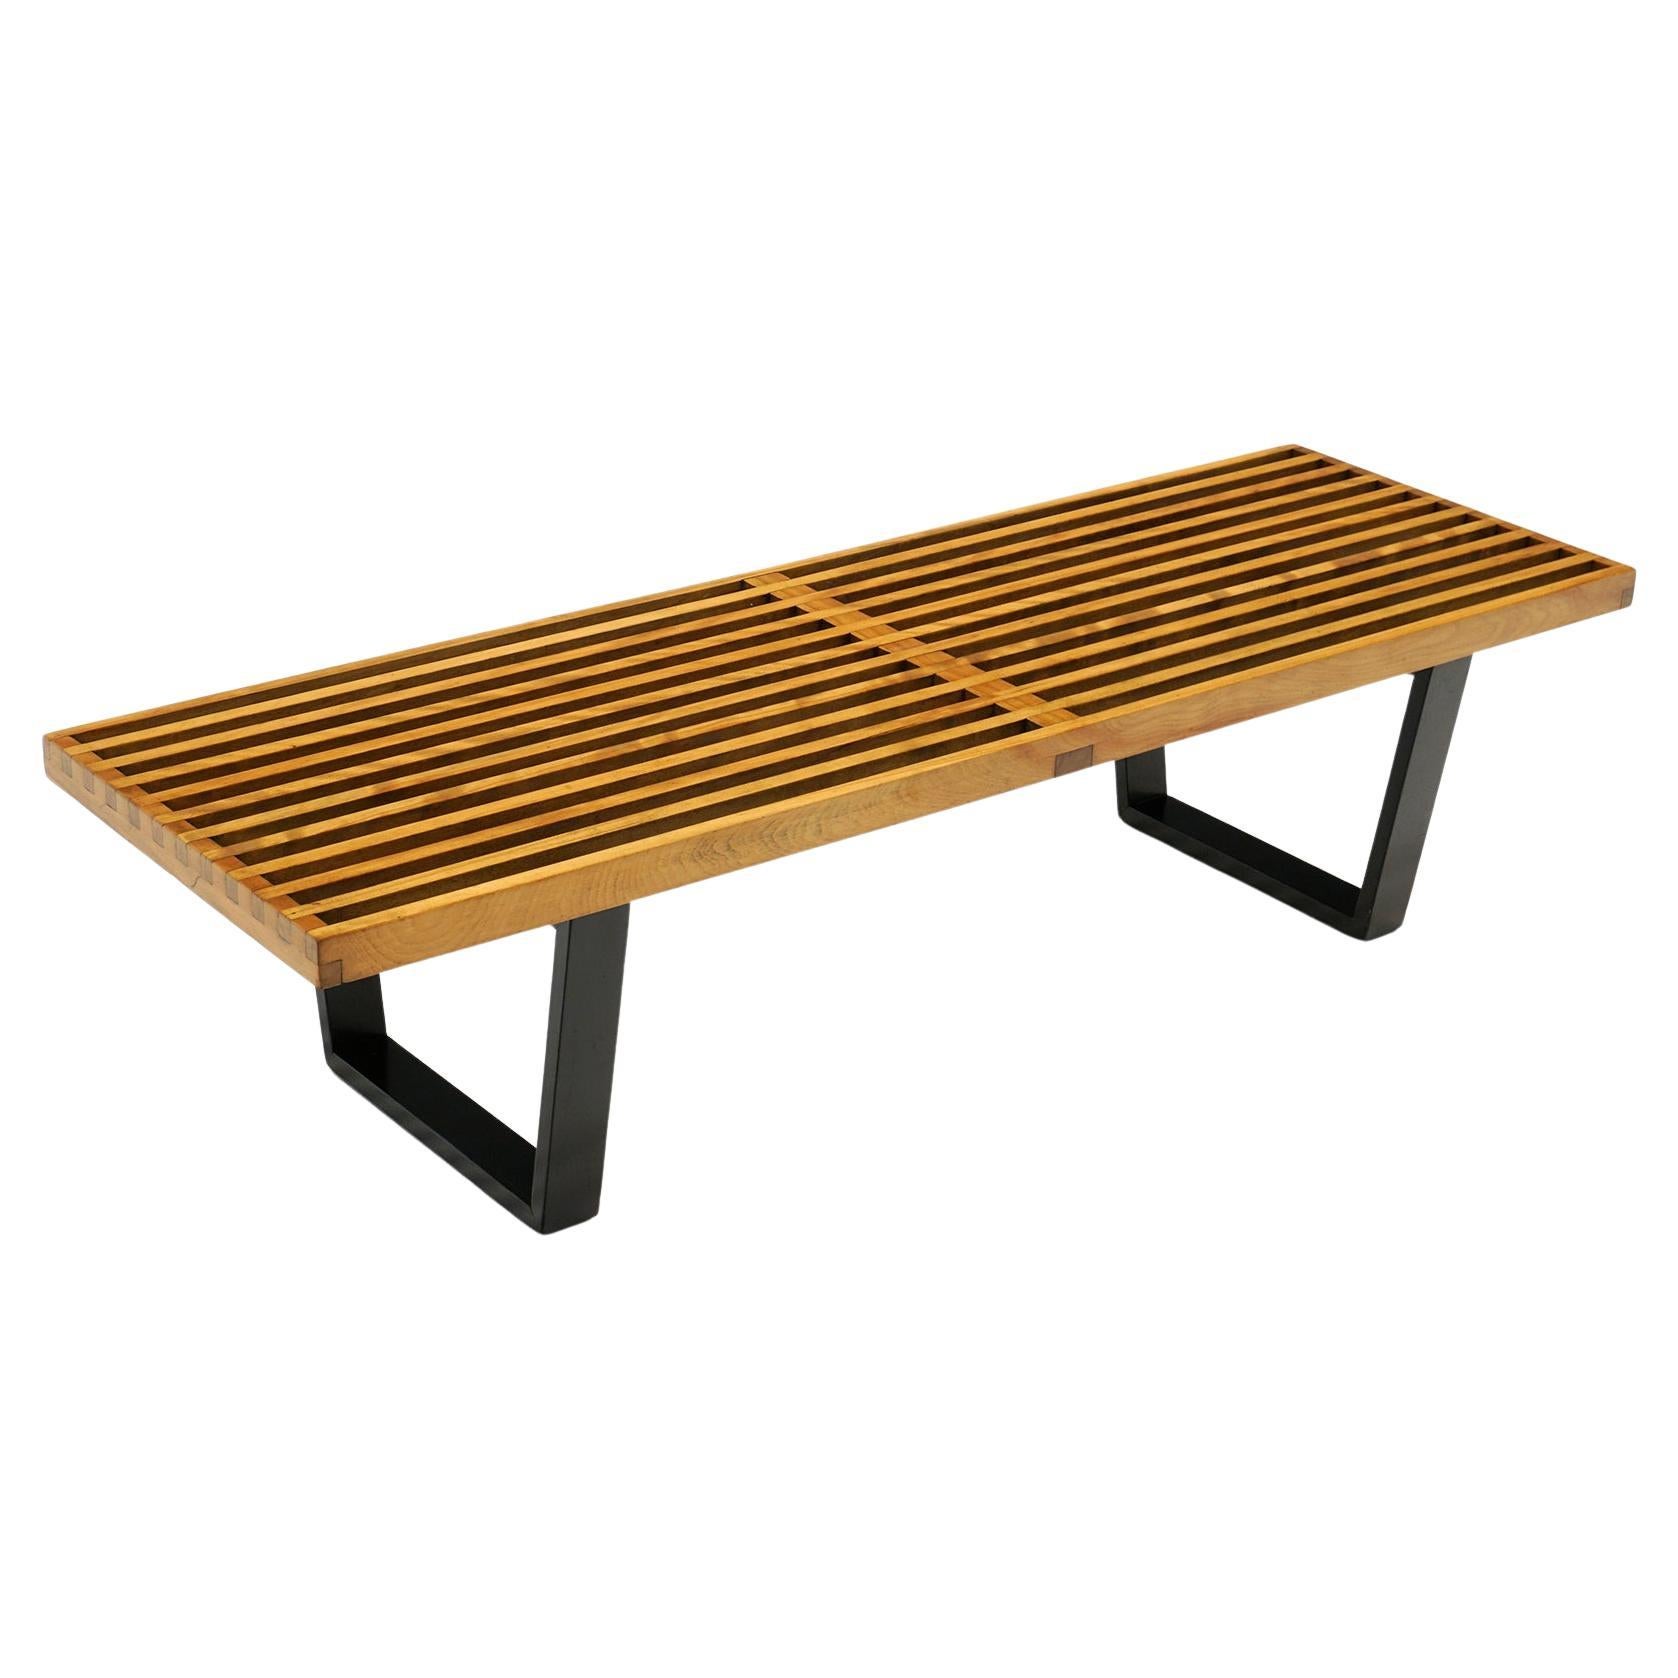 Early Platform Bench by George Nelson for Herman Miller, Not a Reissue